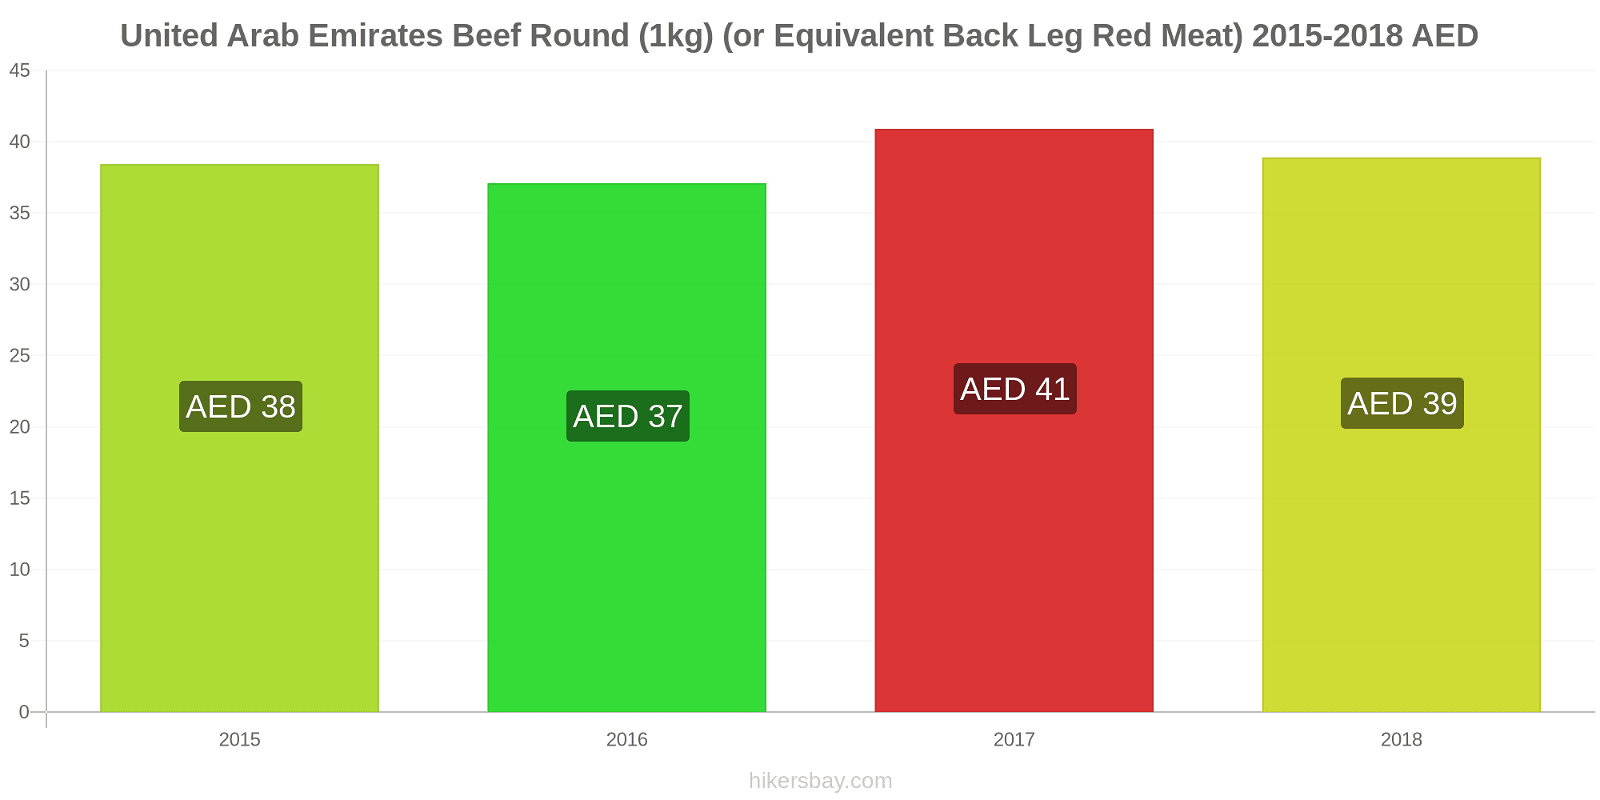 United Arab Emirates price changes Beef (1kg) (or similar red meat) hikersbay.com